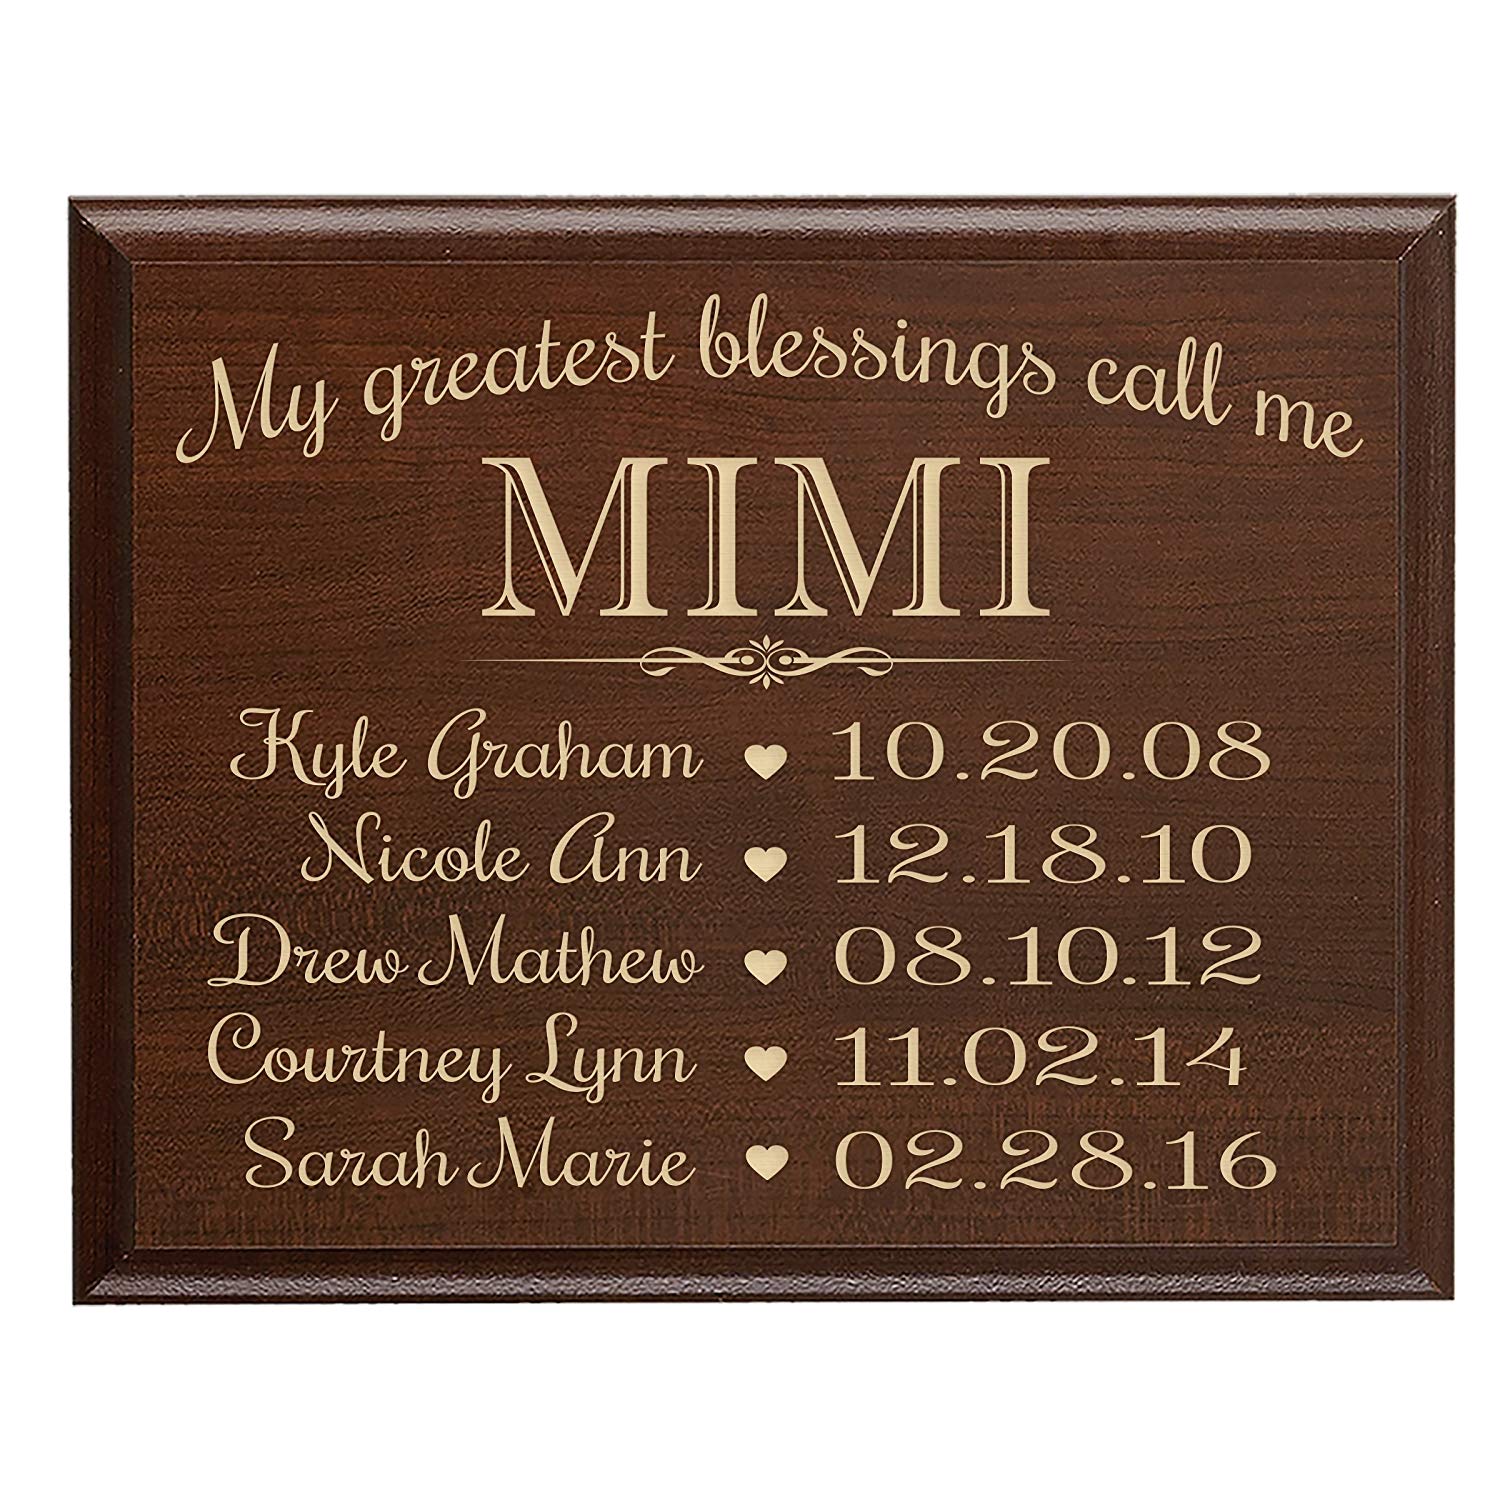 My Greatest Blessings Call Me Mimi Wall Plaque - LifeSong Milestones